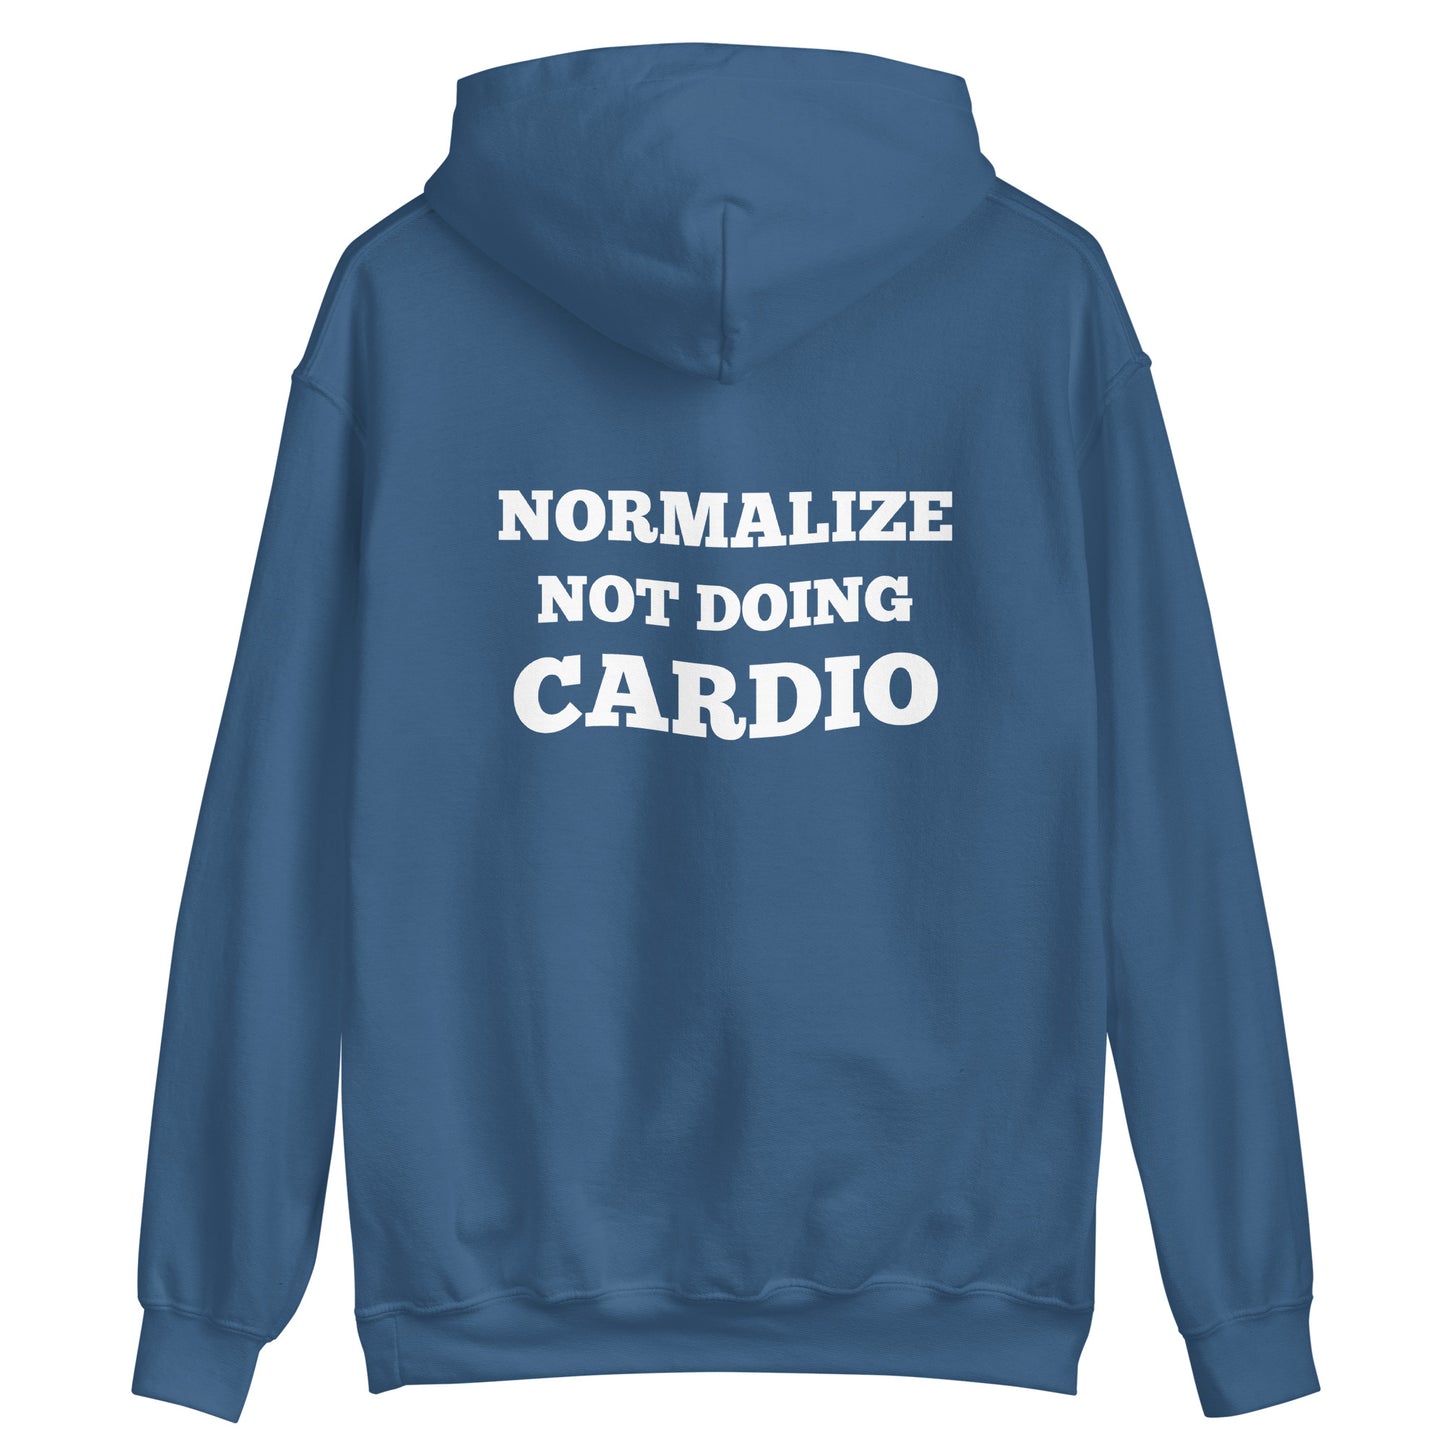 Normalize not doing cardio